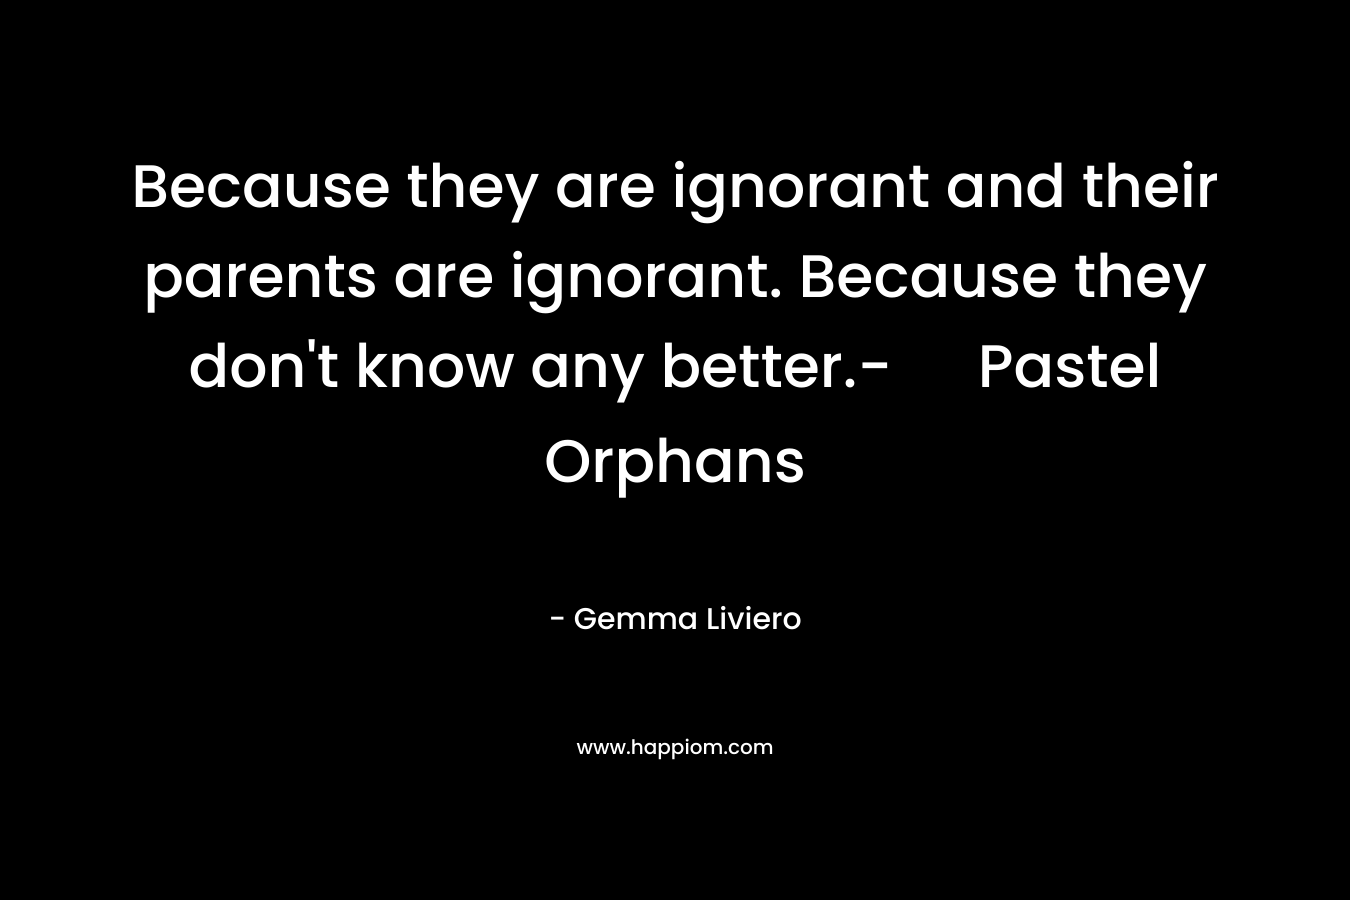 Because they are ignorant and their parents are ignorant. Because they don't know any better.- Pastel Orphans